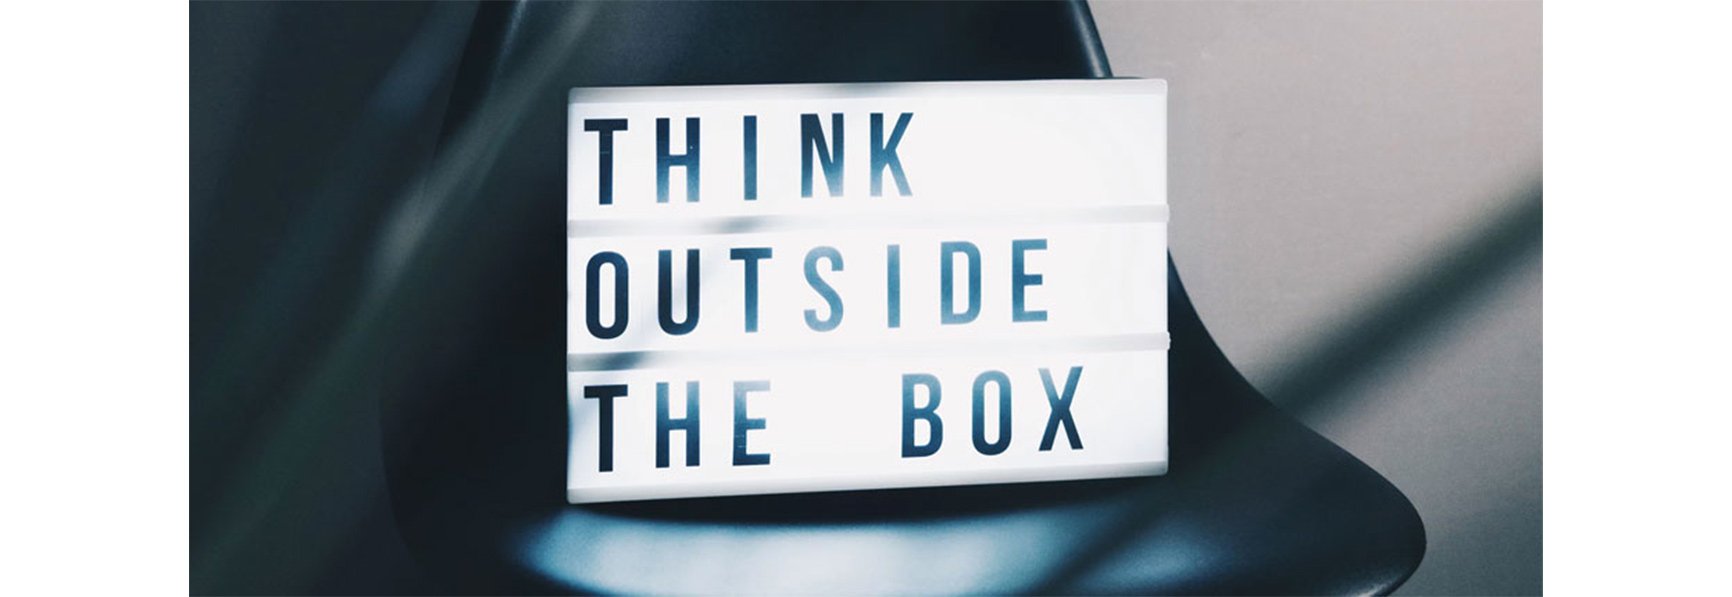 think outside the box note